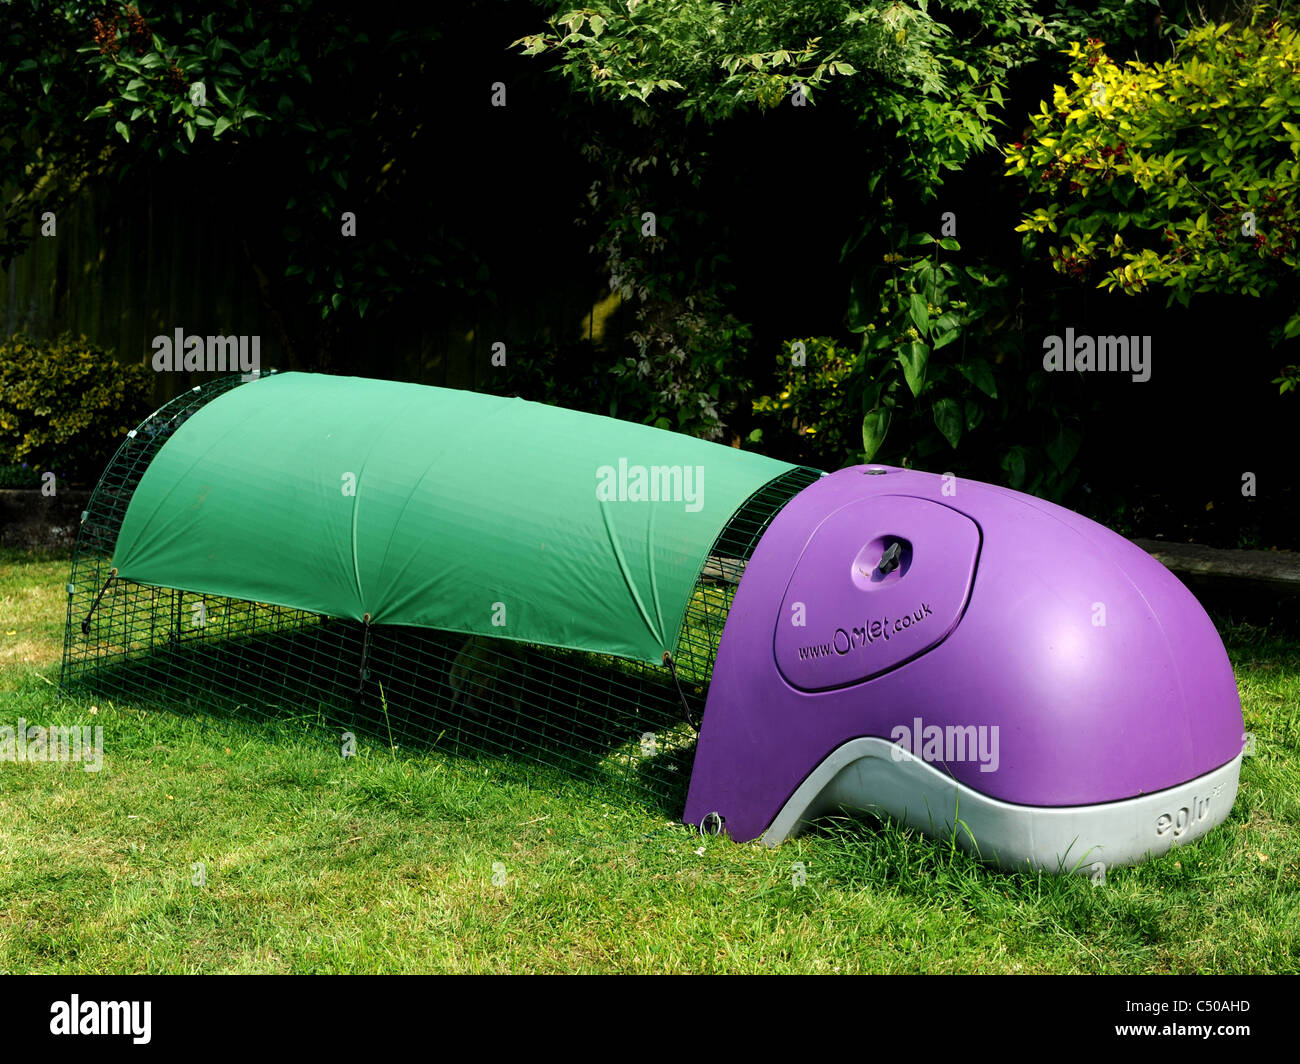 A modern rabbit run with sleeping area made by Omlet. Stock Photo